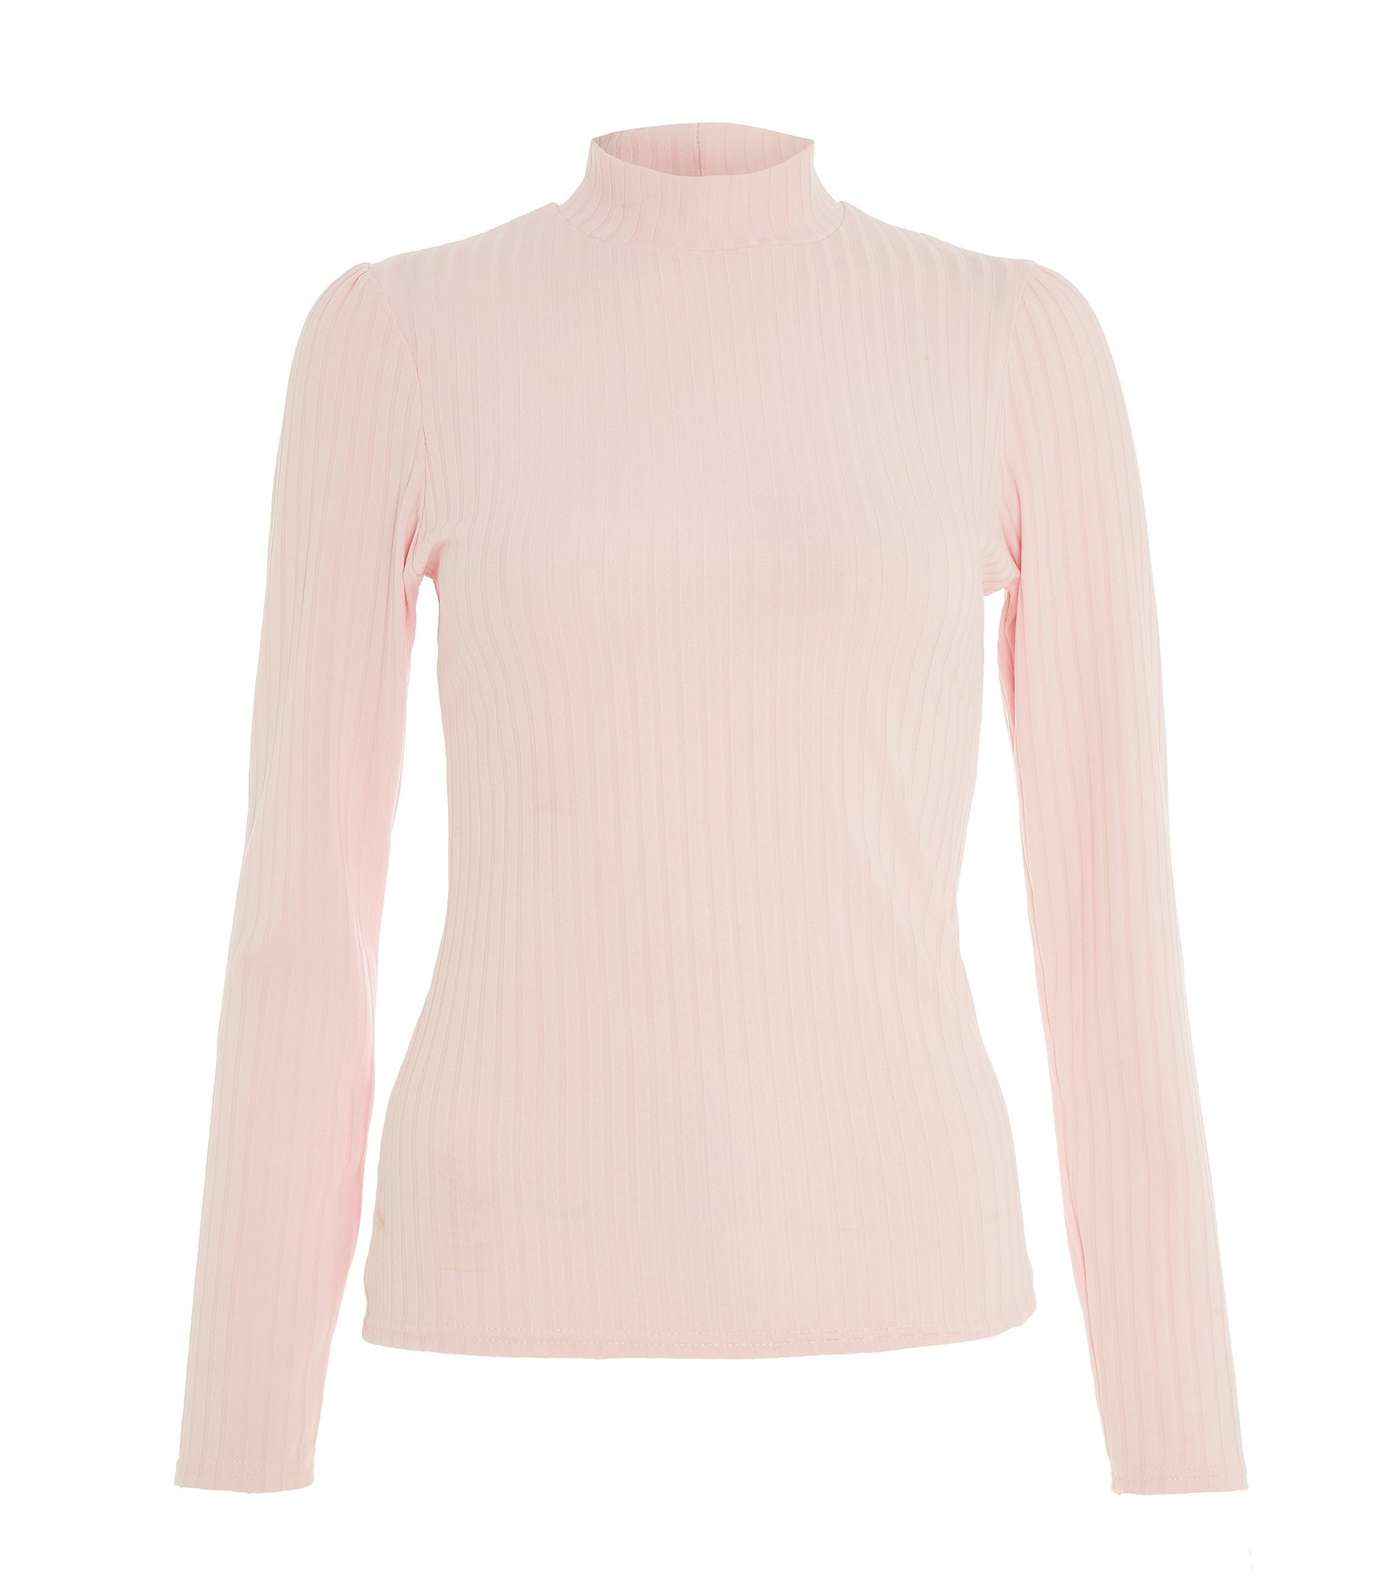 QUIZ Pink Ribbed Knit High Neck Top Image 4